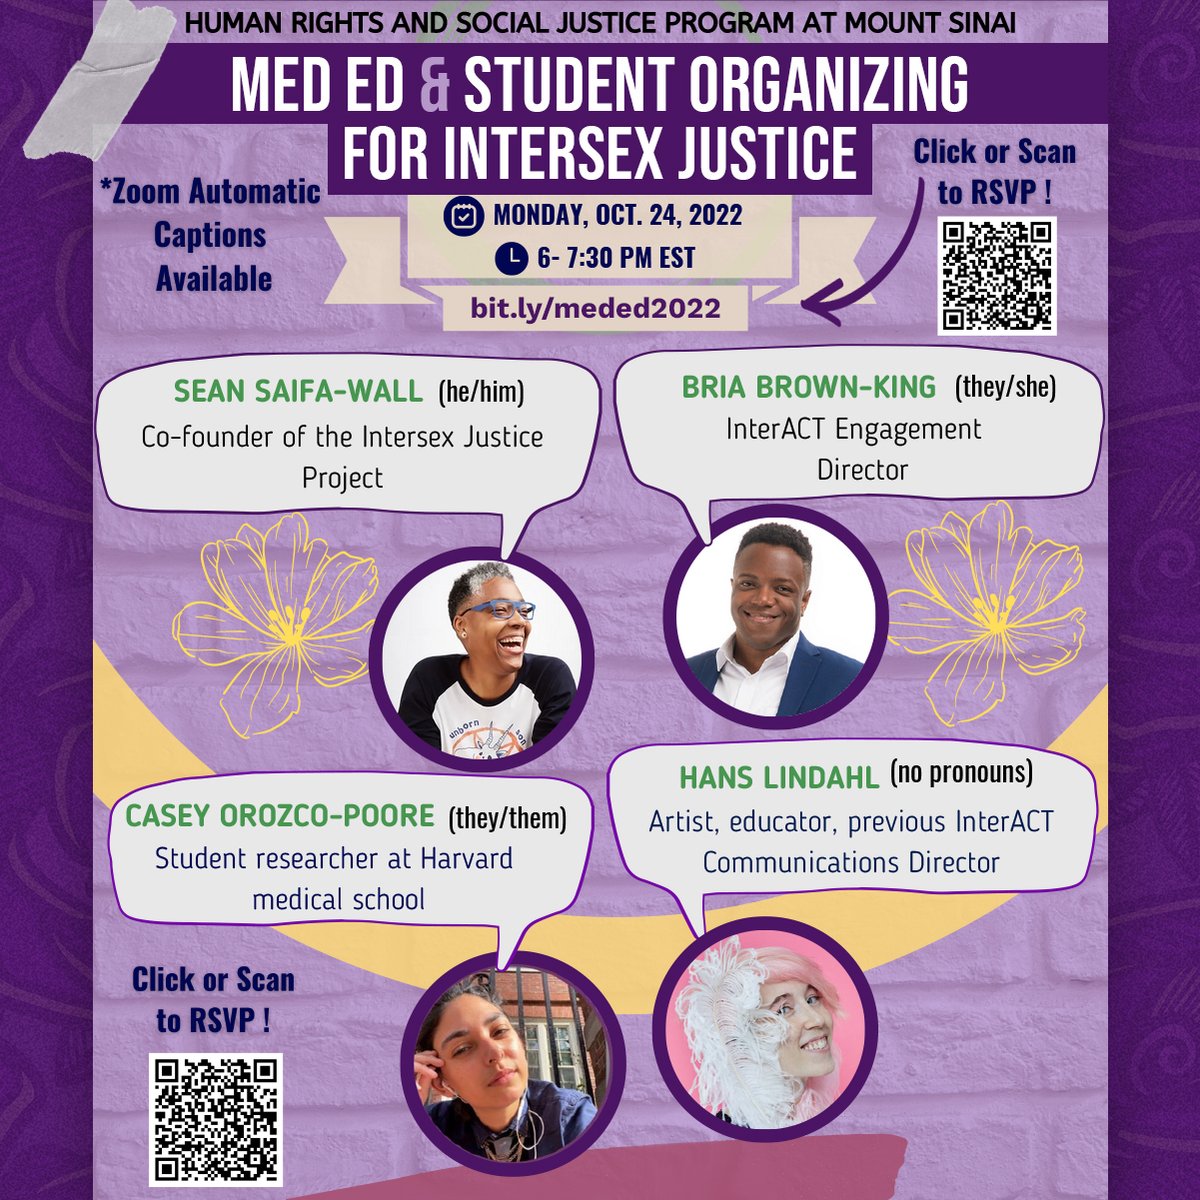 Med students, #MedTwitter: join our free (and recorded) webinar on how to organize to #EndIntersexSurgery at your school or hospital! 🩺 Put on by the incredible @IntersexJustice and co via Mt. Sinai. 📢 REGISTER: bit.ly/meded2022 info in 🧵